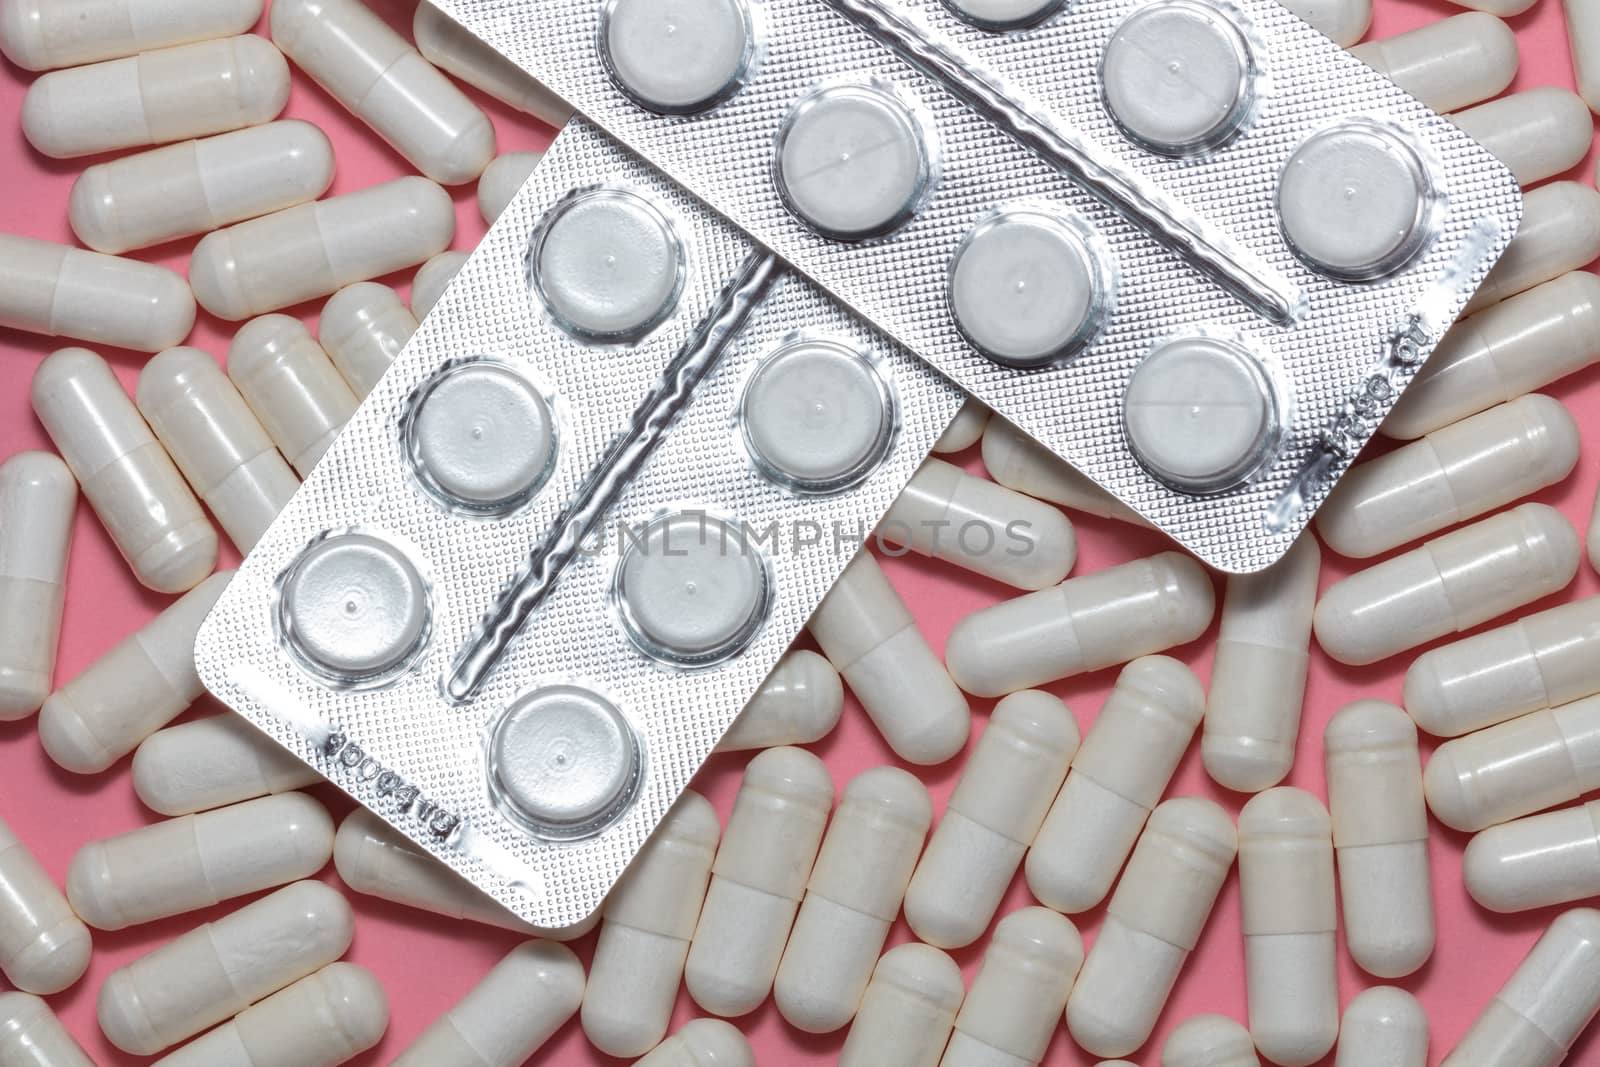 Top close up shot of various white pills on pink background. Healthcare, medical and pharmaceutical concept.